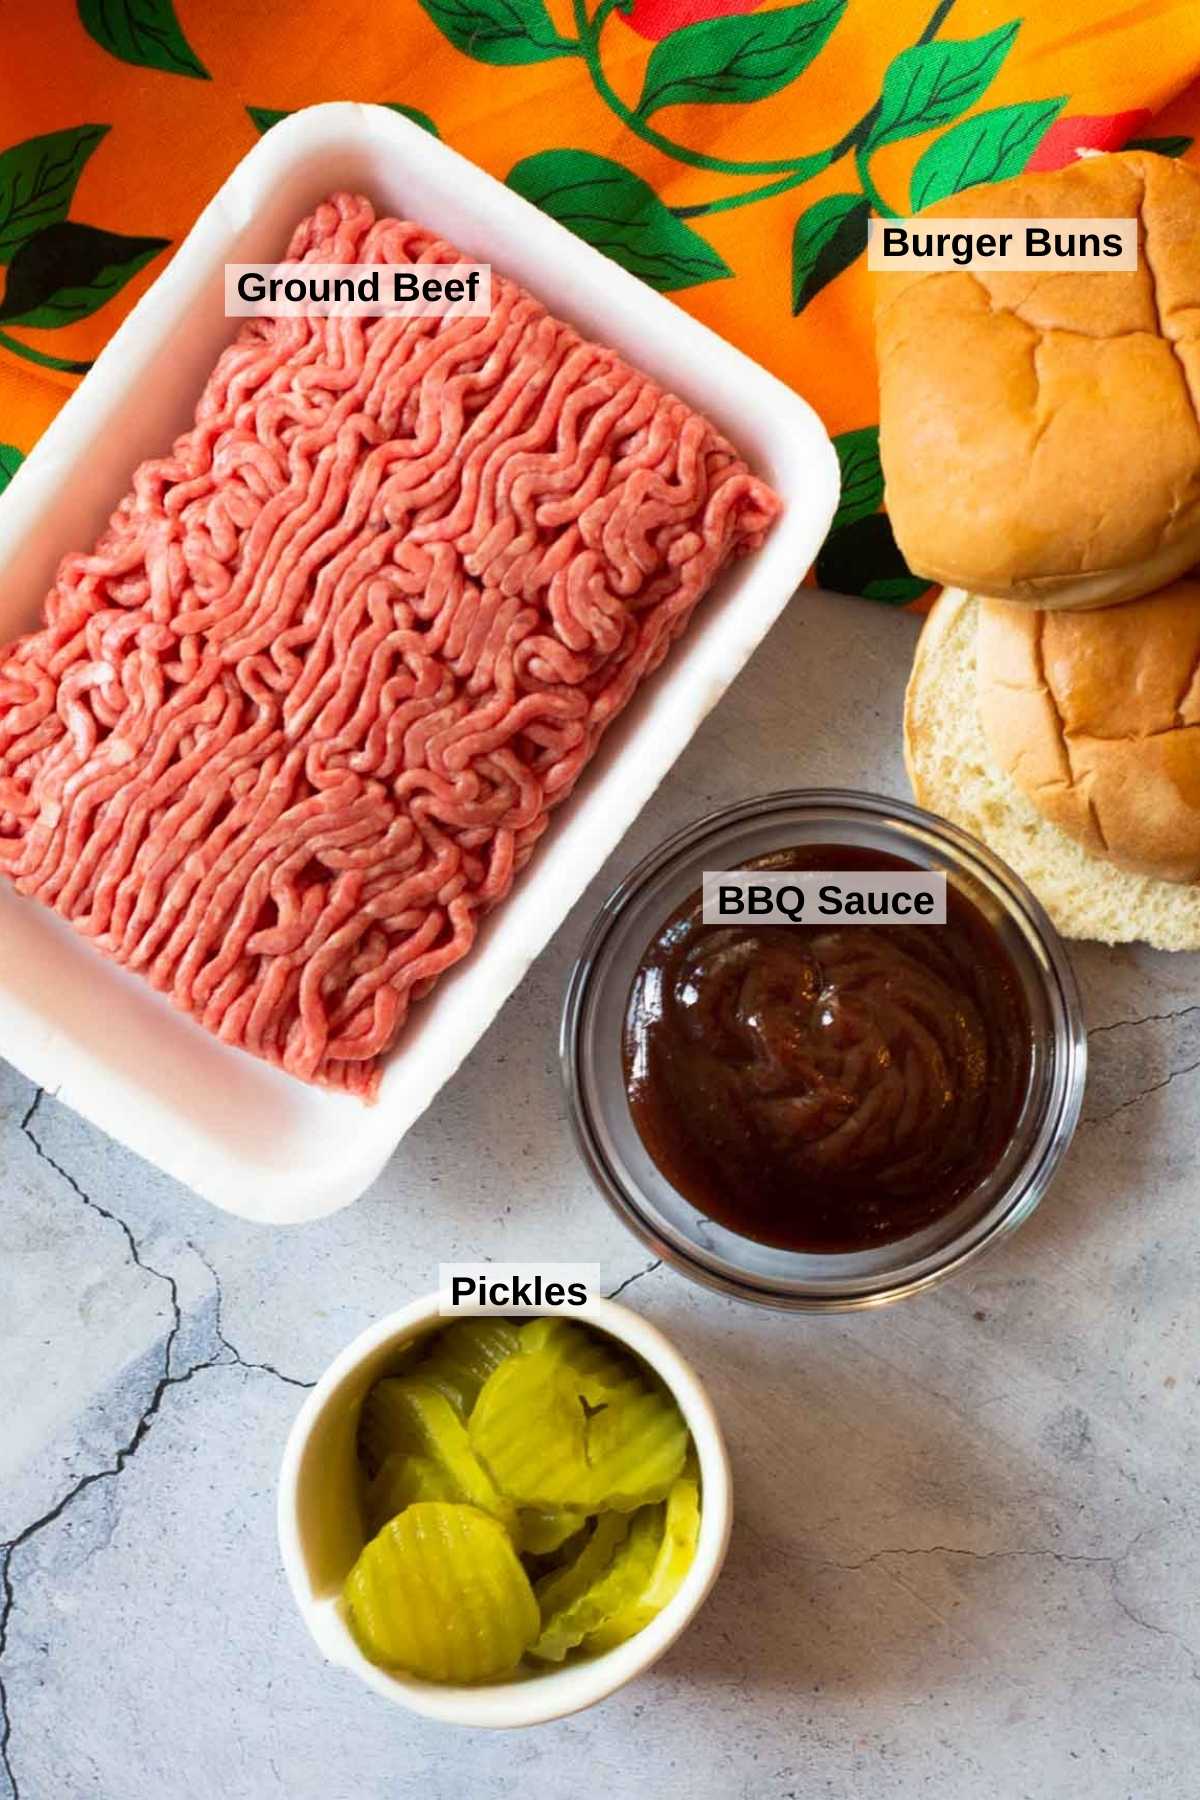 Ingredients to make Bobby Flay Burger with Cole Slaw.